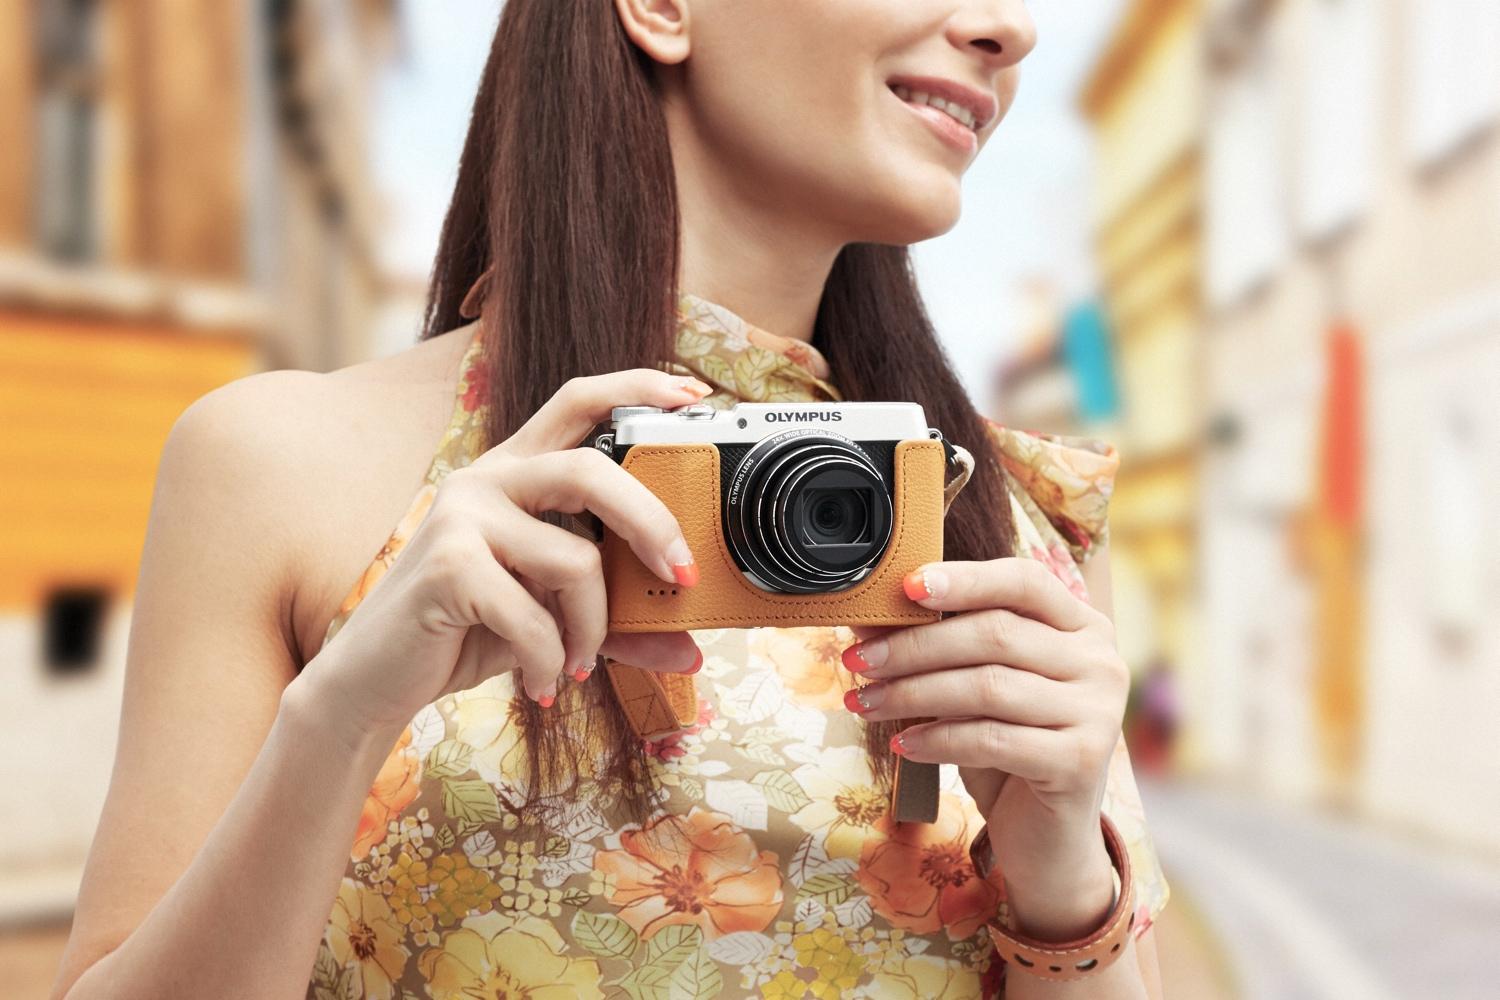 olympus stylus sh 2 compact camera retains 5 axis stabilization adds new night modes sh2 10